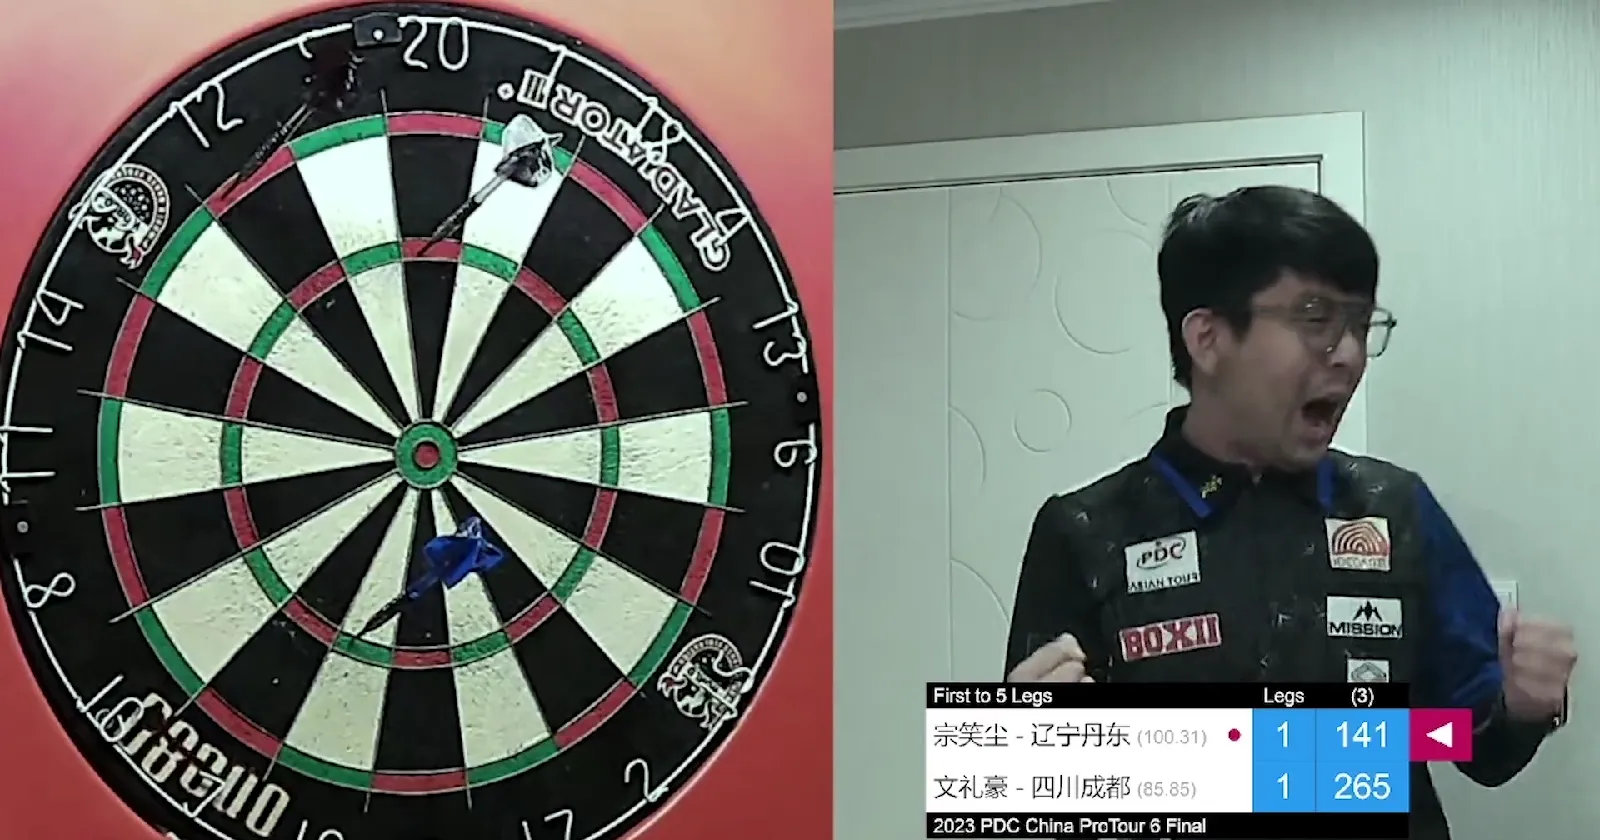 2023 02 13 12 17 37 pdc darts on twitter history for zong zong xiaochen pins perfection at p